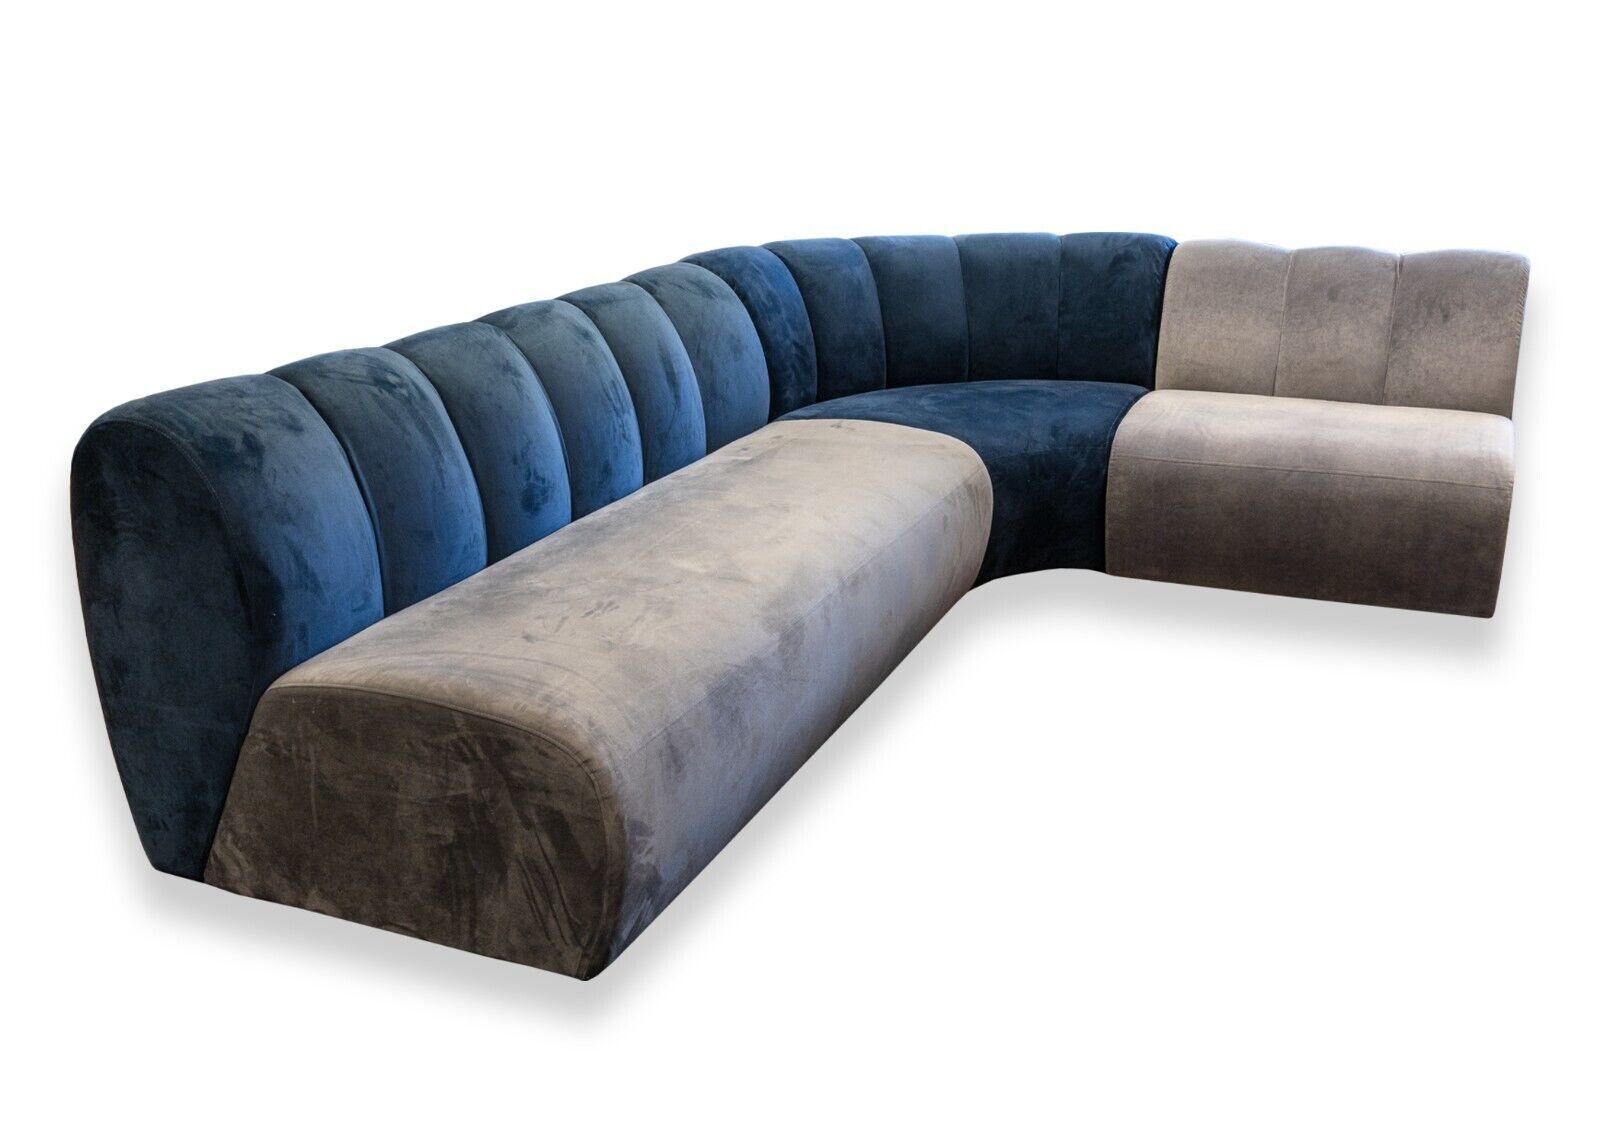 A contemporary west elm x Steelcase Belle prototype navy and grey sectional sofa. A stunning and unique multicolored 3pc sofa sectional. This piece is a prototype, 1 of only 4, of the Belle sofa. This piece features a ultra sofa velvet tufted